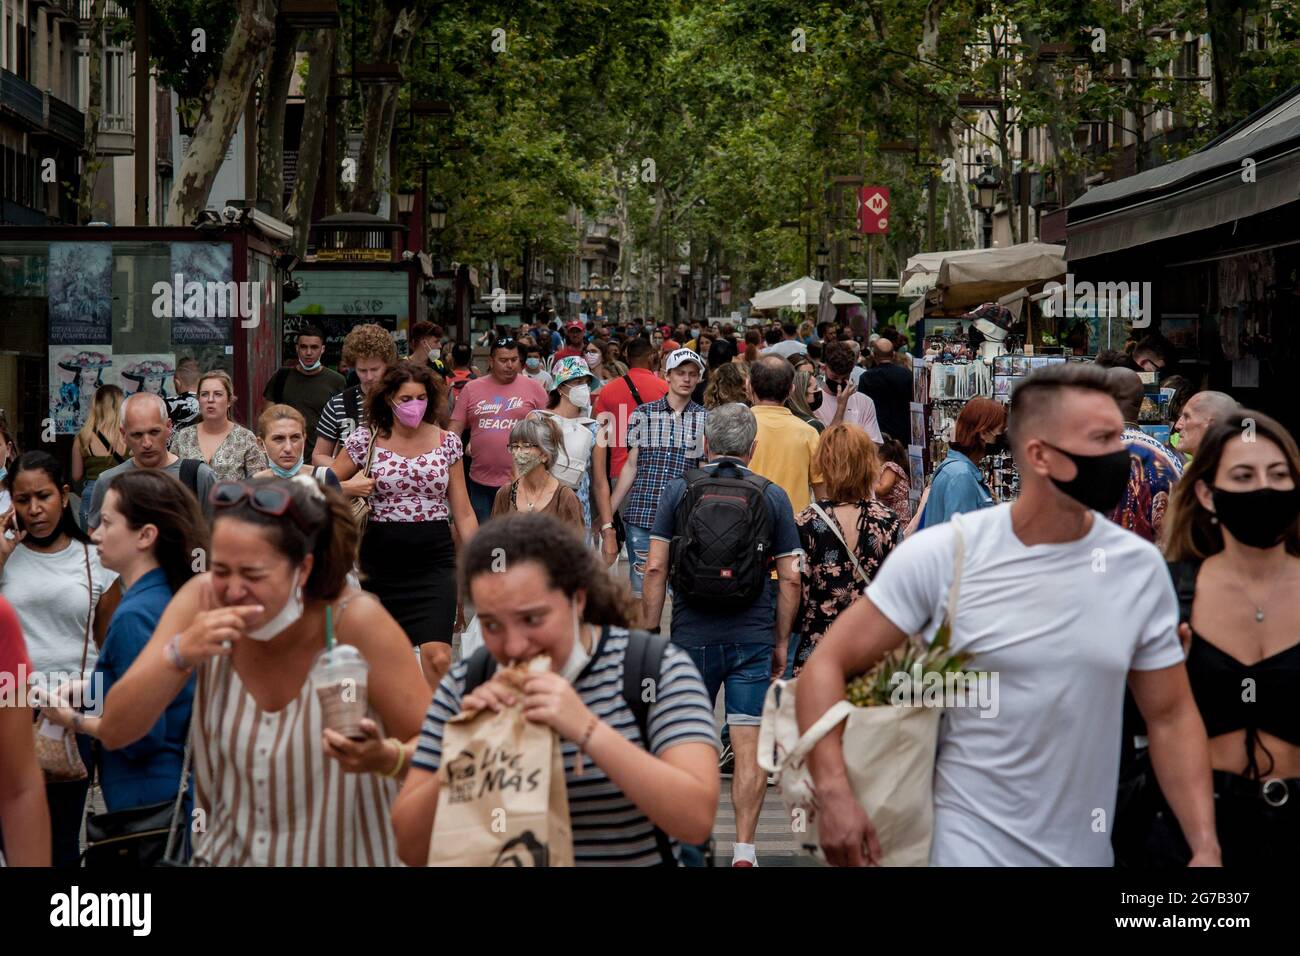 Barcelona, Spain. July 12, 2021, Barcelona, Spain: People, much of them  tourists, crowd La Rambla in Barcelona. Spain is among EU countries with  highest coronavirus infection rates, some regions are reimposing measures